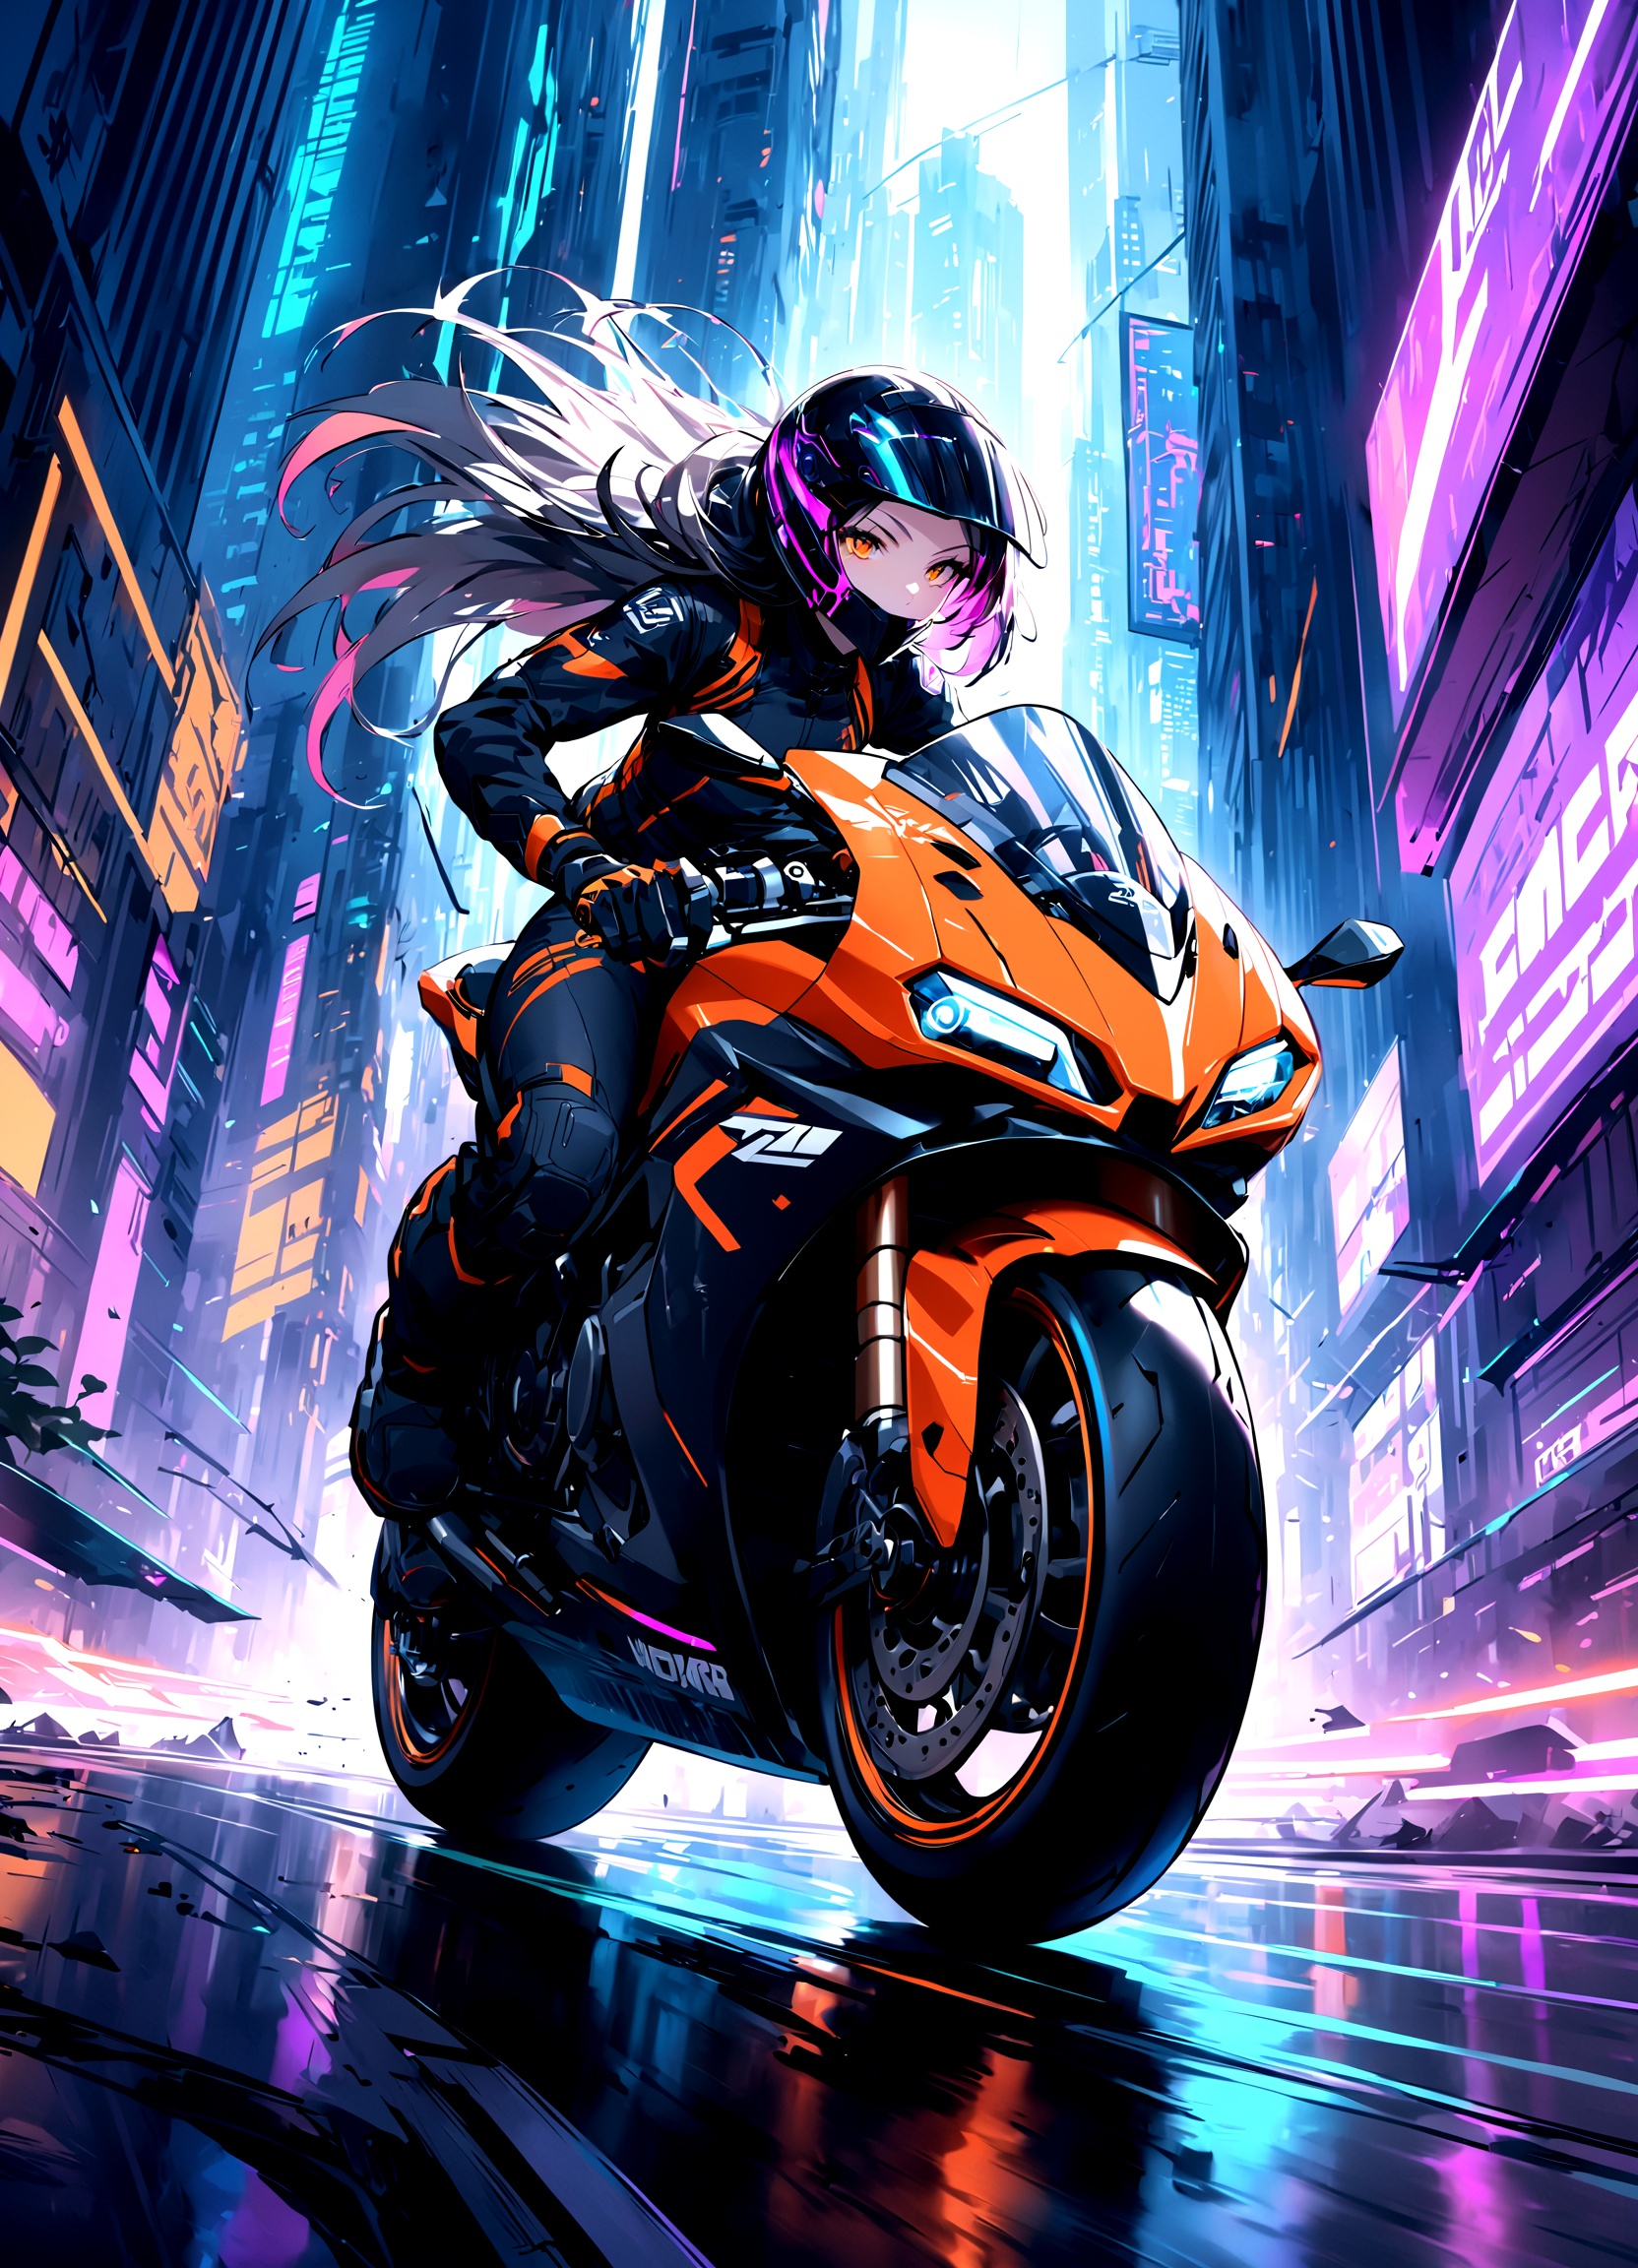 An electrifying illustration capturing the fast-paced action of a motorcycle racer speeding through a futuristic cyberpunk cityscape. The motorcycle rider, dressed in sleek and edgy attire, leans forward with intense determination as they navigate the high-speed race. The motorcycle leaves behind long trails of blurred and elongated light, creating a mesmerizing effect of motion and speed. The cyberpunk-inspired cityscape is filled with towering neon-lit skyscrapers, bustling streets, and futuristic advertisements, immersing the viewer in a vibrant and dynamic world. The color palette chosen for this image includes vibrant neon colors, contrasting with dark shadows and atmospheric haze, adding to the gritty and futuristic atmosphere. The overall result is a thrilling portrayal of a motorcycle racer in a cyberpunk setting, beautifully rendered in a style that captures the ********** and energy of this high-speed competition.